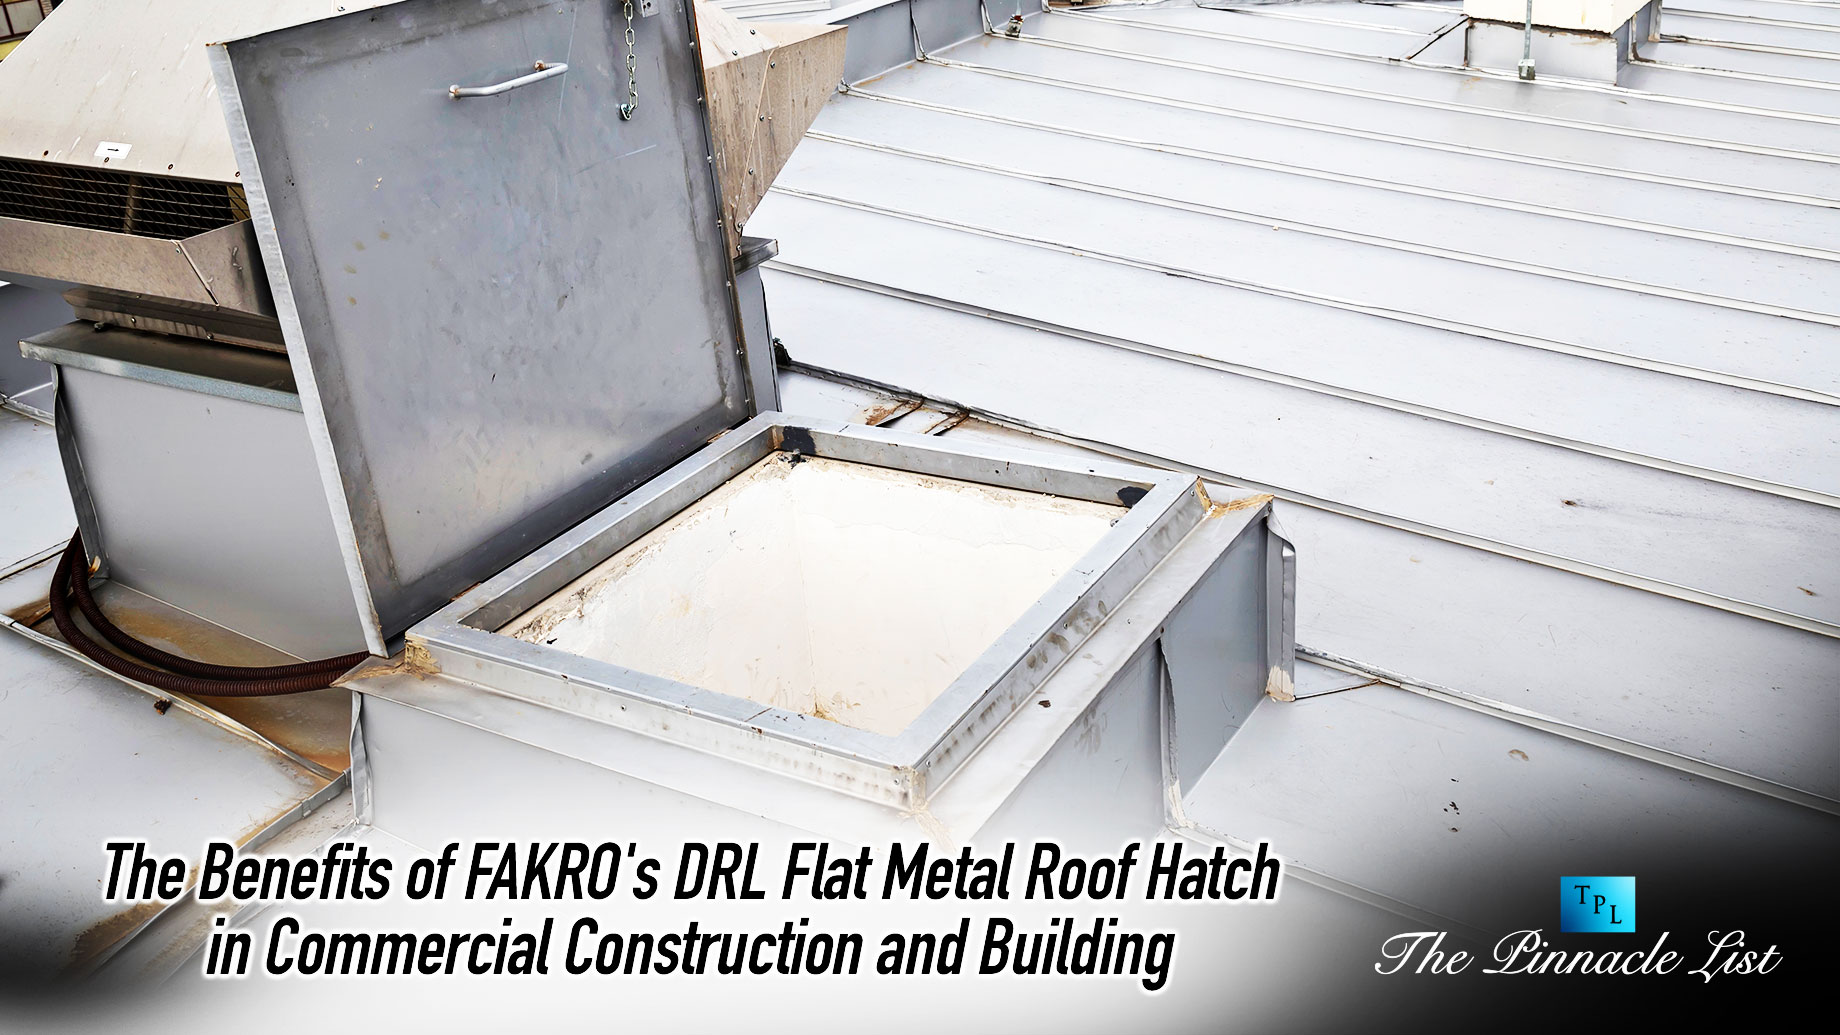 The Benefits of FAKRO's DRL Flat Metal Roof Hatch in Commercial Construction and Building